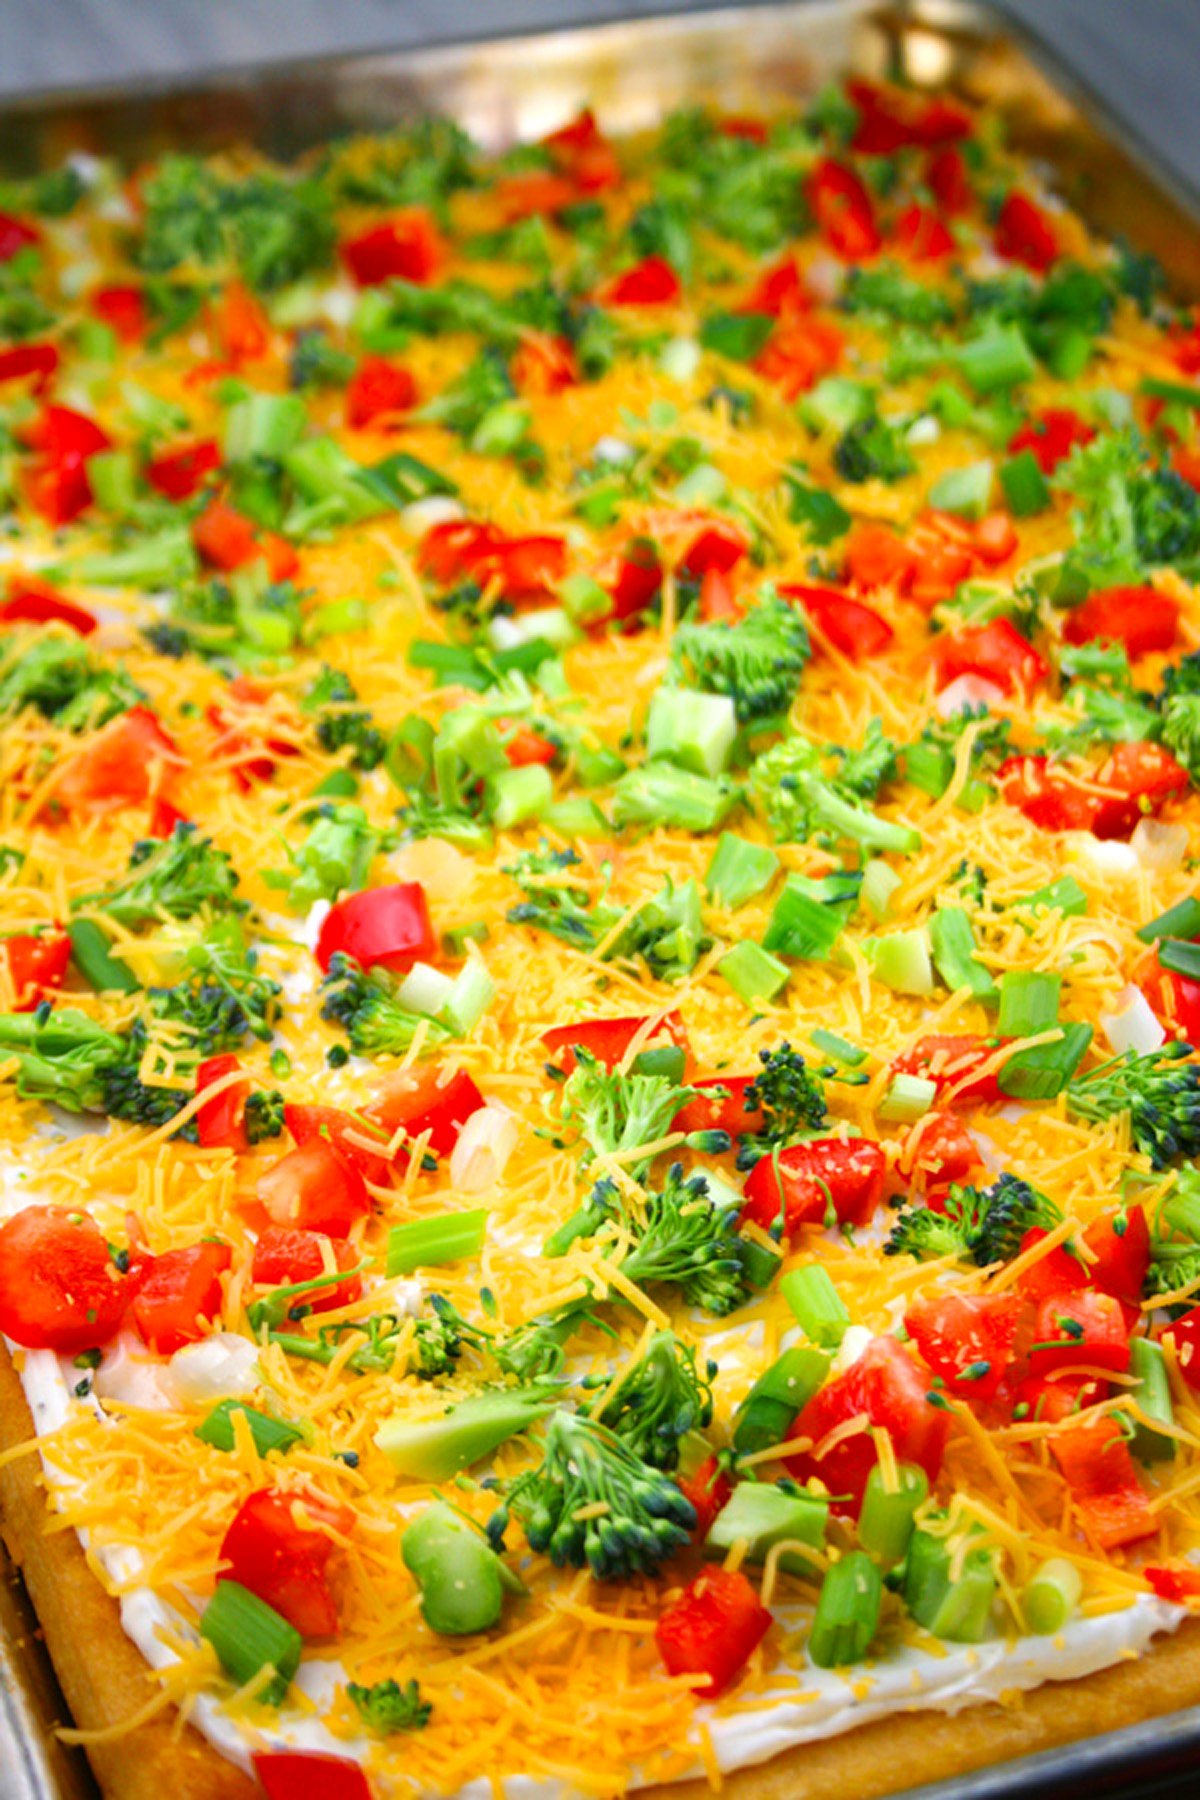 Colorful veggies on top of cold veggie pizza.